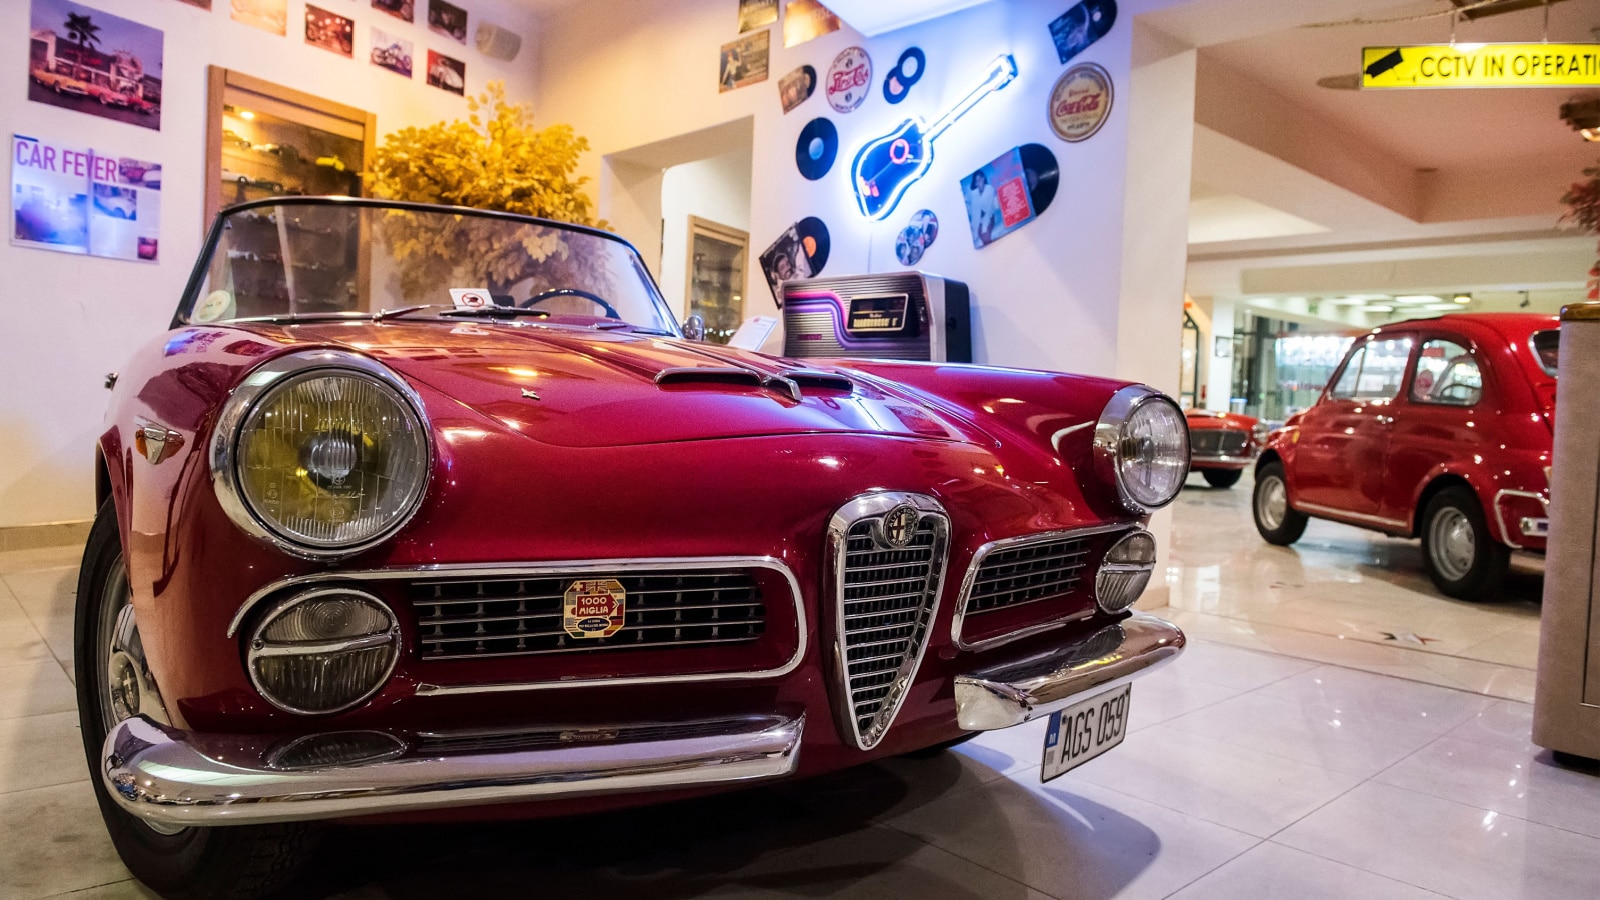 Bugibba, Saint Paul's Bay, Malta - April 13, 2017. An Alfa Romeo 2000 Touring Spider inside the Malta Classic Car Collection Museum, at the town of Saint Paul's Bay in the Northern Region of Malta.